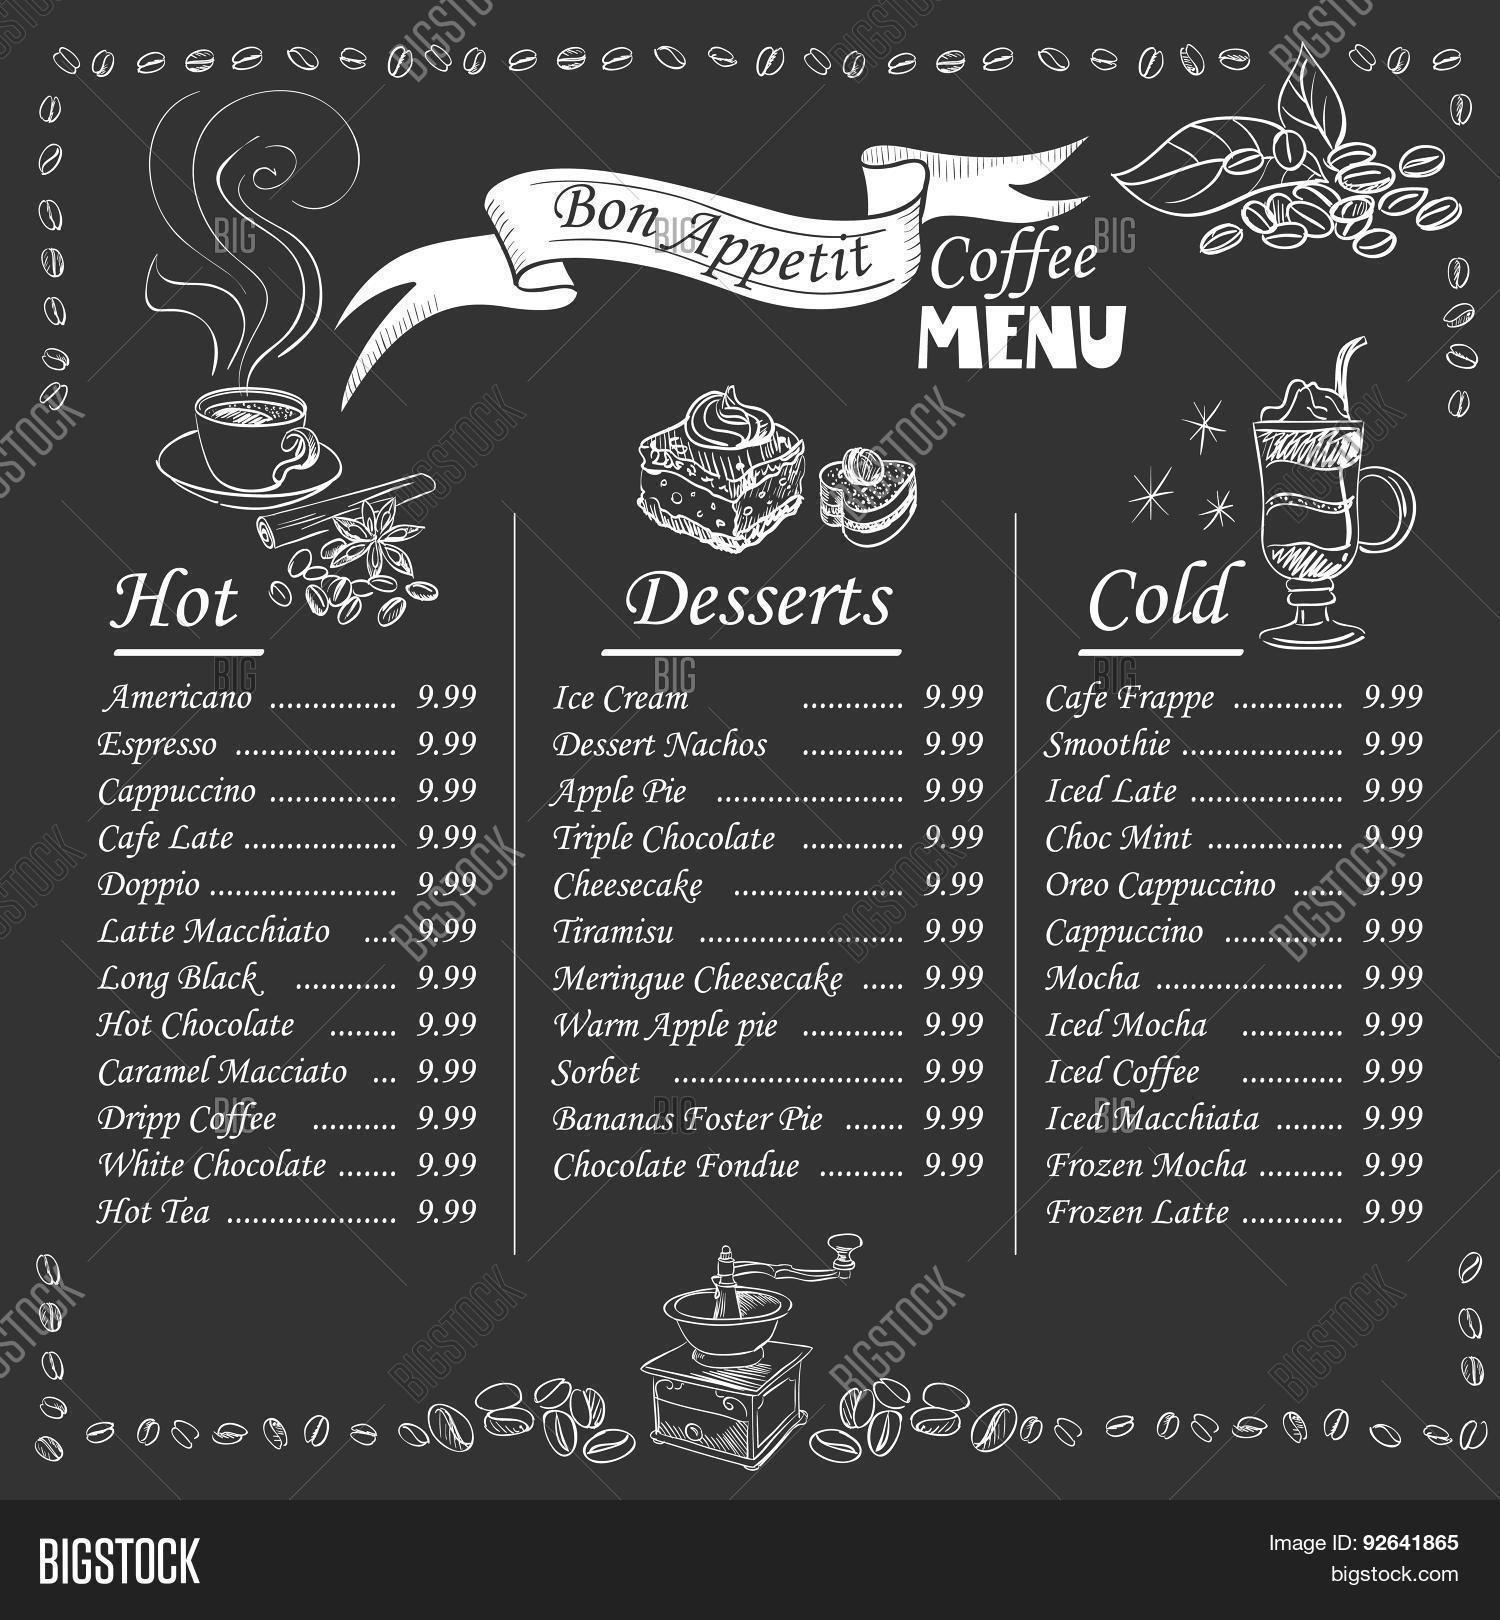 Coffee menu on everything. Chalkboard clipart cafe